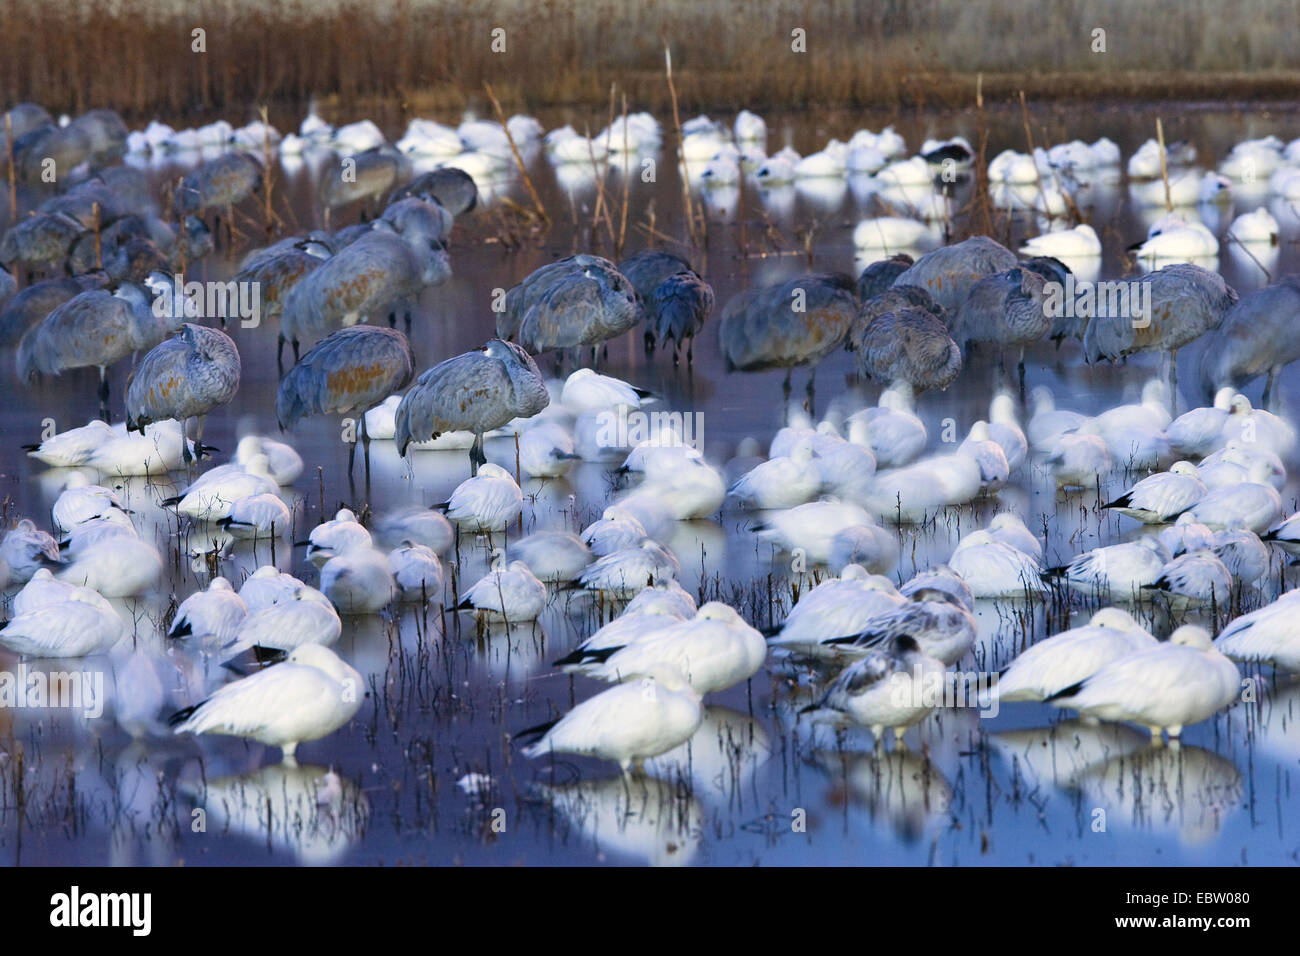 snow goose (Anser caerulescens atlanticus, Chen caerulescens atlanticus), Snow Geese and Sandhill Cranes in Wildlife Refuge in the morning, USA, New Mexico, Bosque del Apache Wildlife Refuge Stock Photo